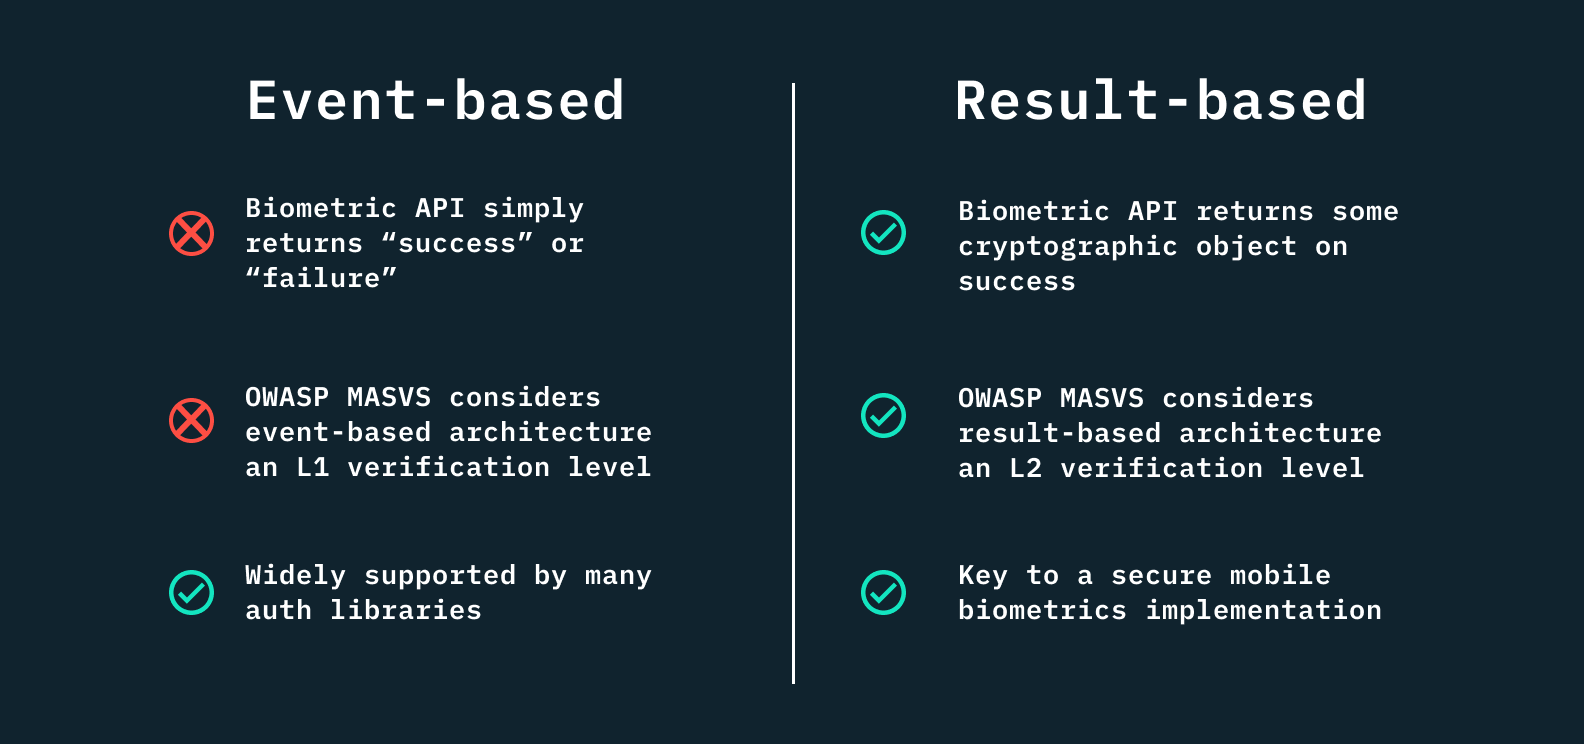 A chart comparing event- vs result- based architecture, finding result-based vastly preferable and more secure